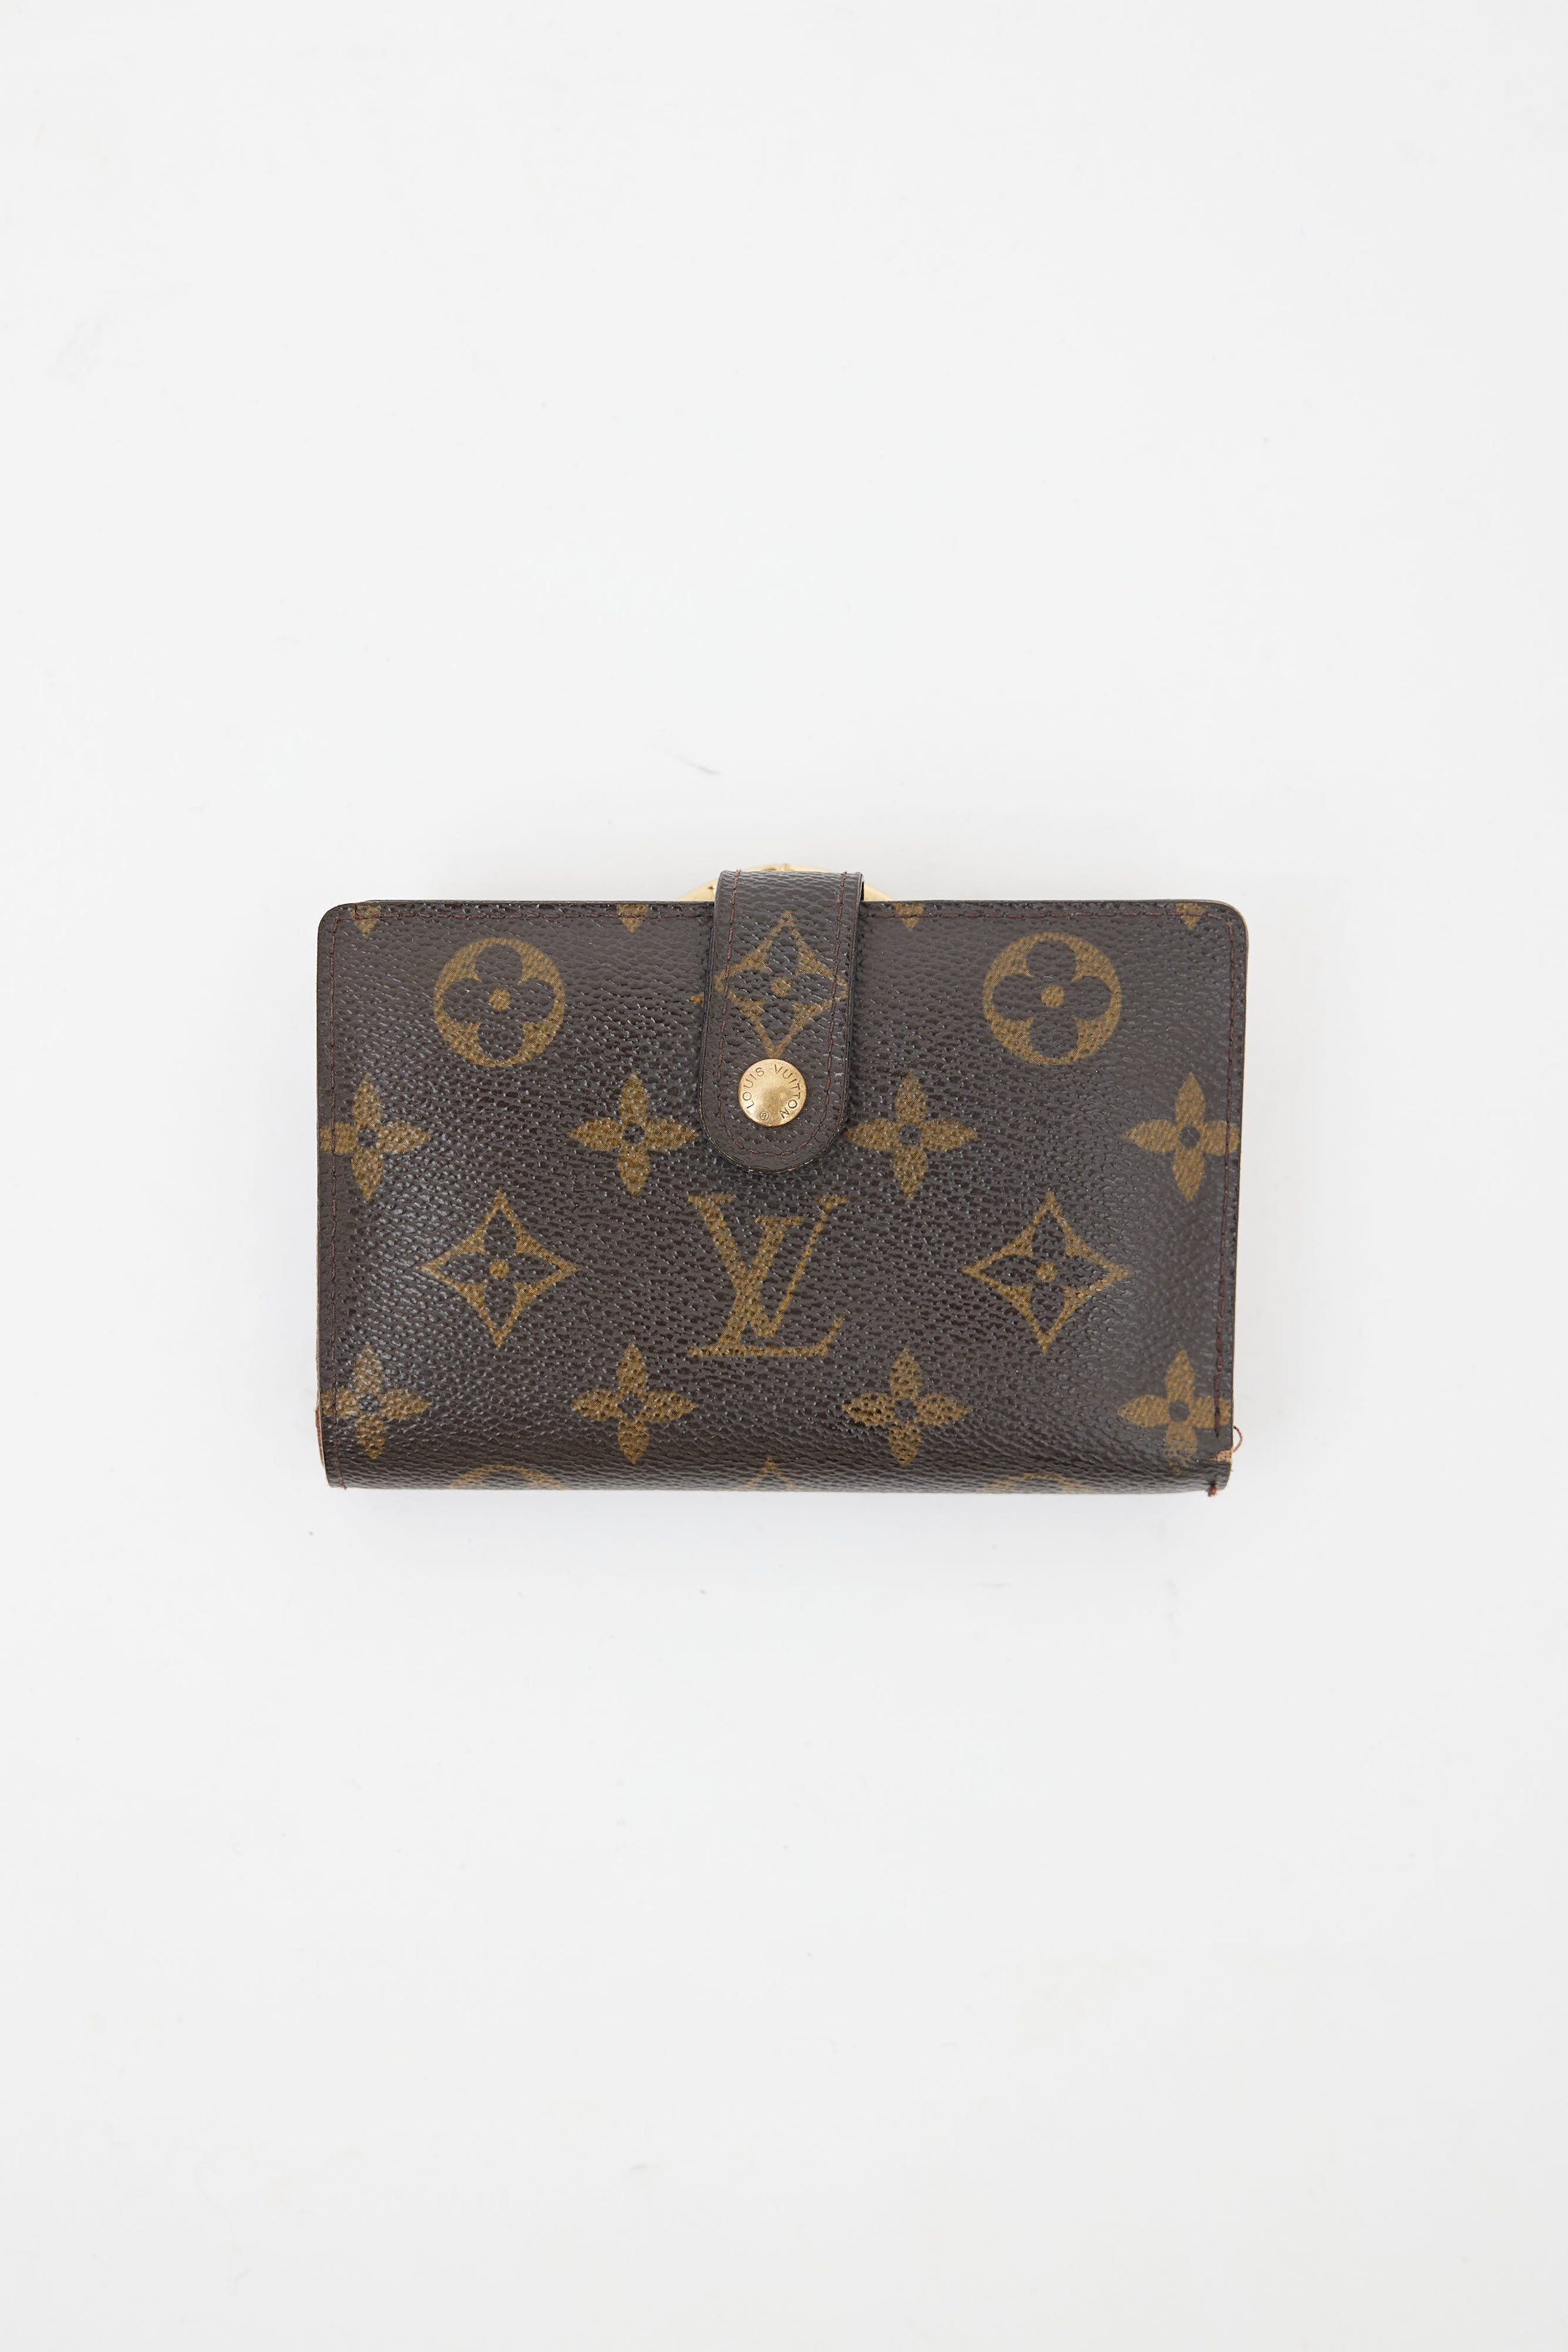 Louis Vuitton - Authenticated Wallet - Leather Brown for Women, Never Worn, with Tag